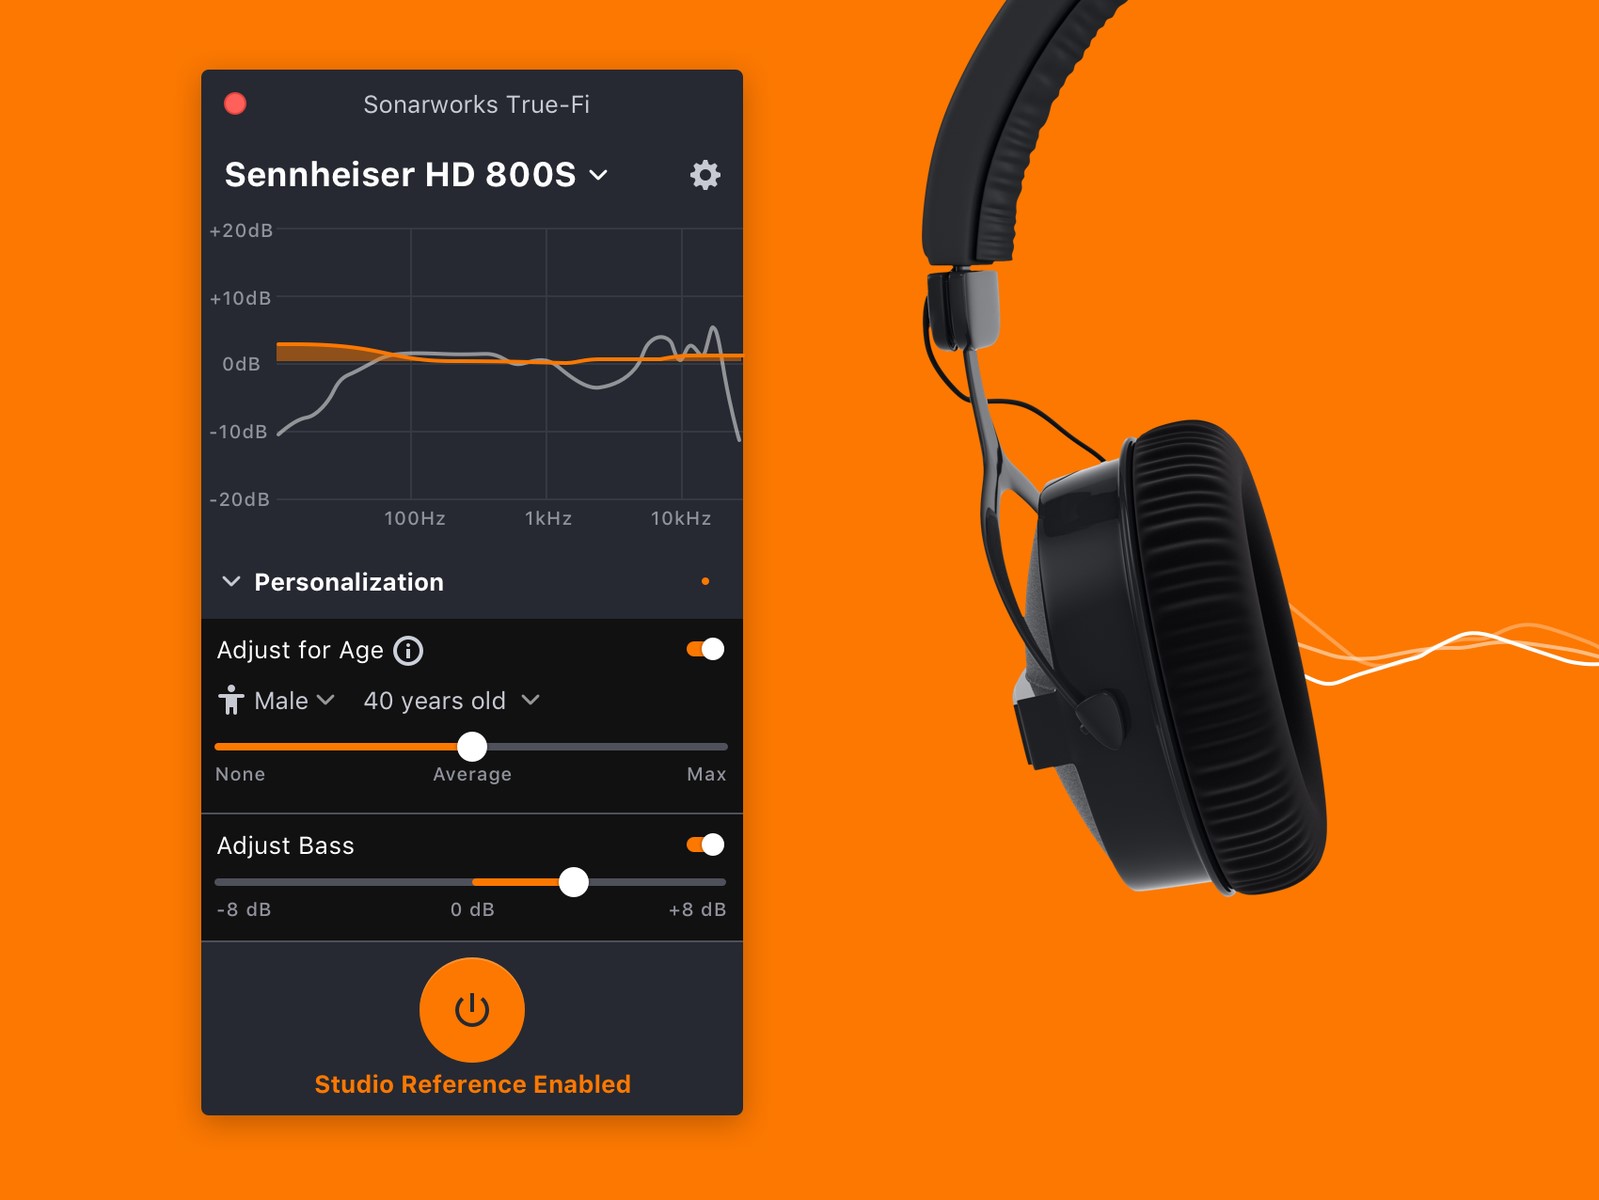 SonarWorks True-Fi software product image with orange background and Sennheiser HD 800S on left half of the image.